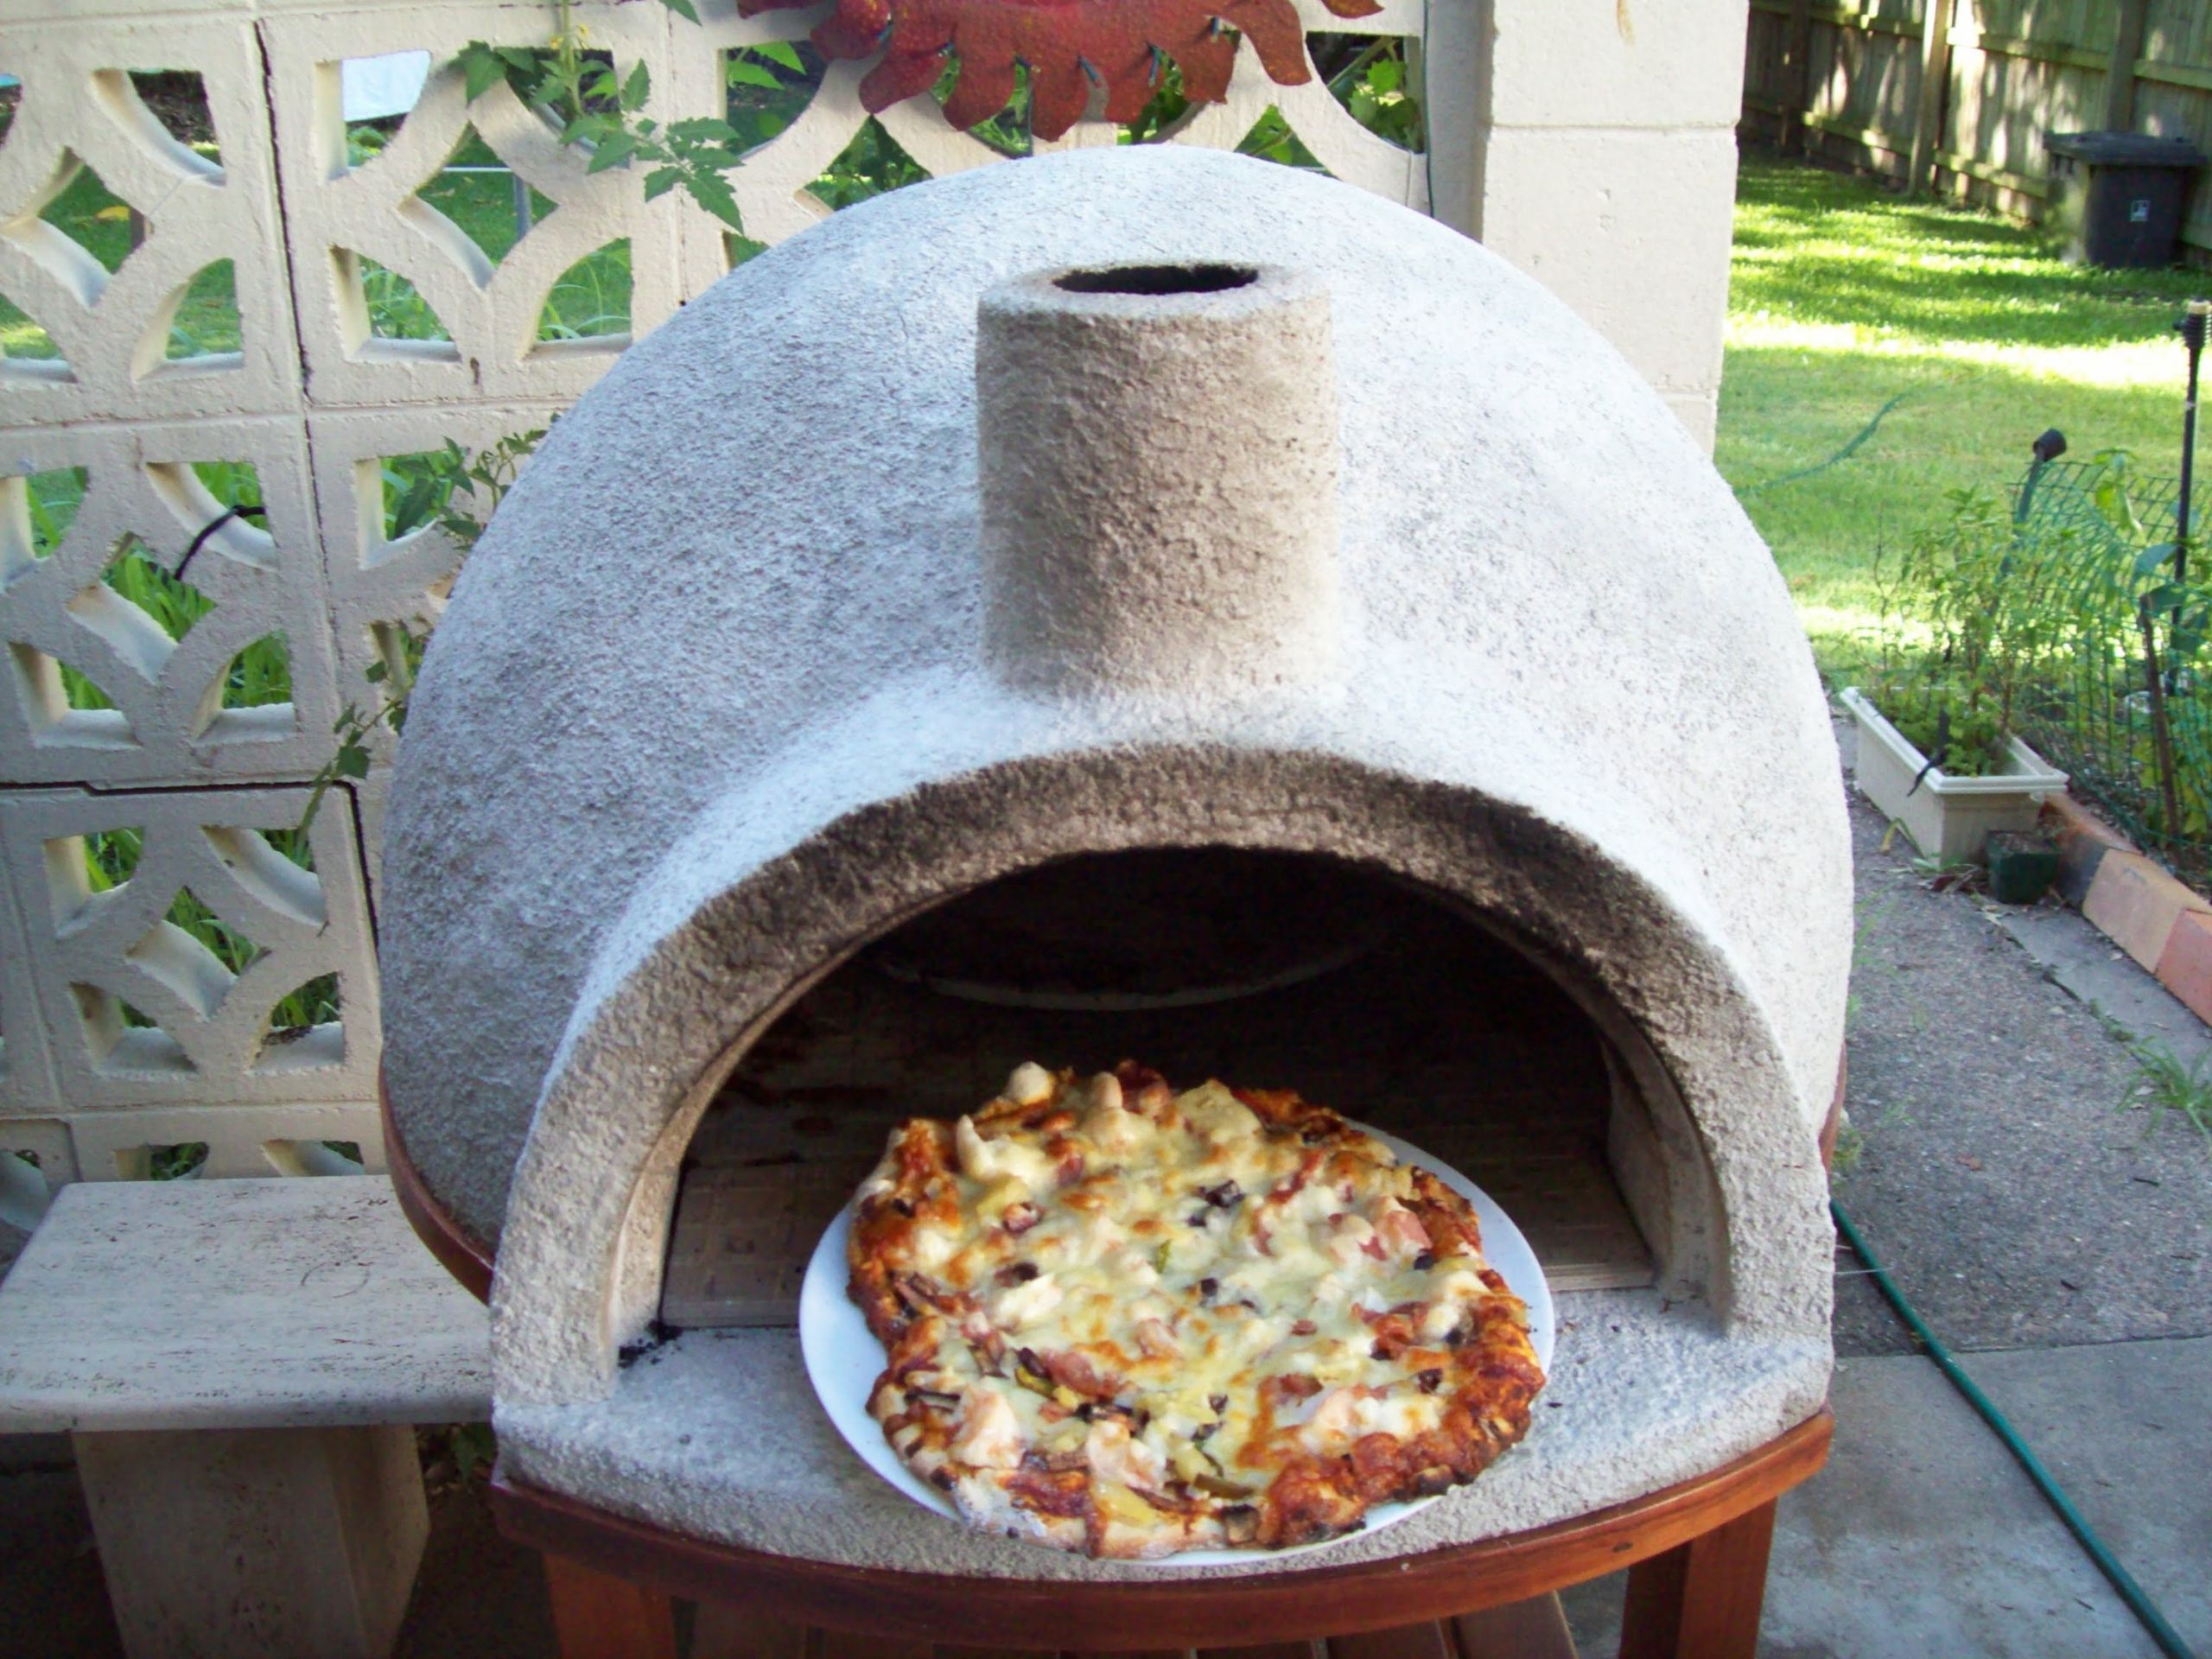 DIY Wood Pizza Oven
 DIY Video How to Build a Backyard Wood Fire Pizza Oven